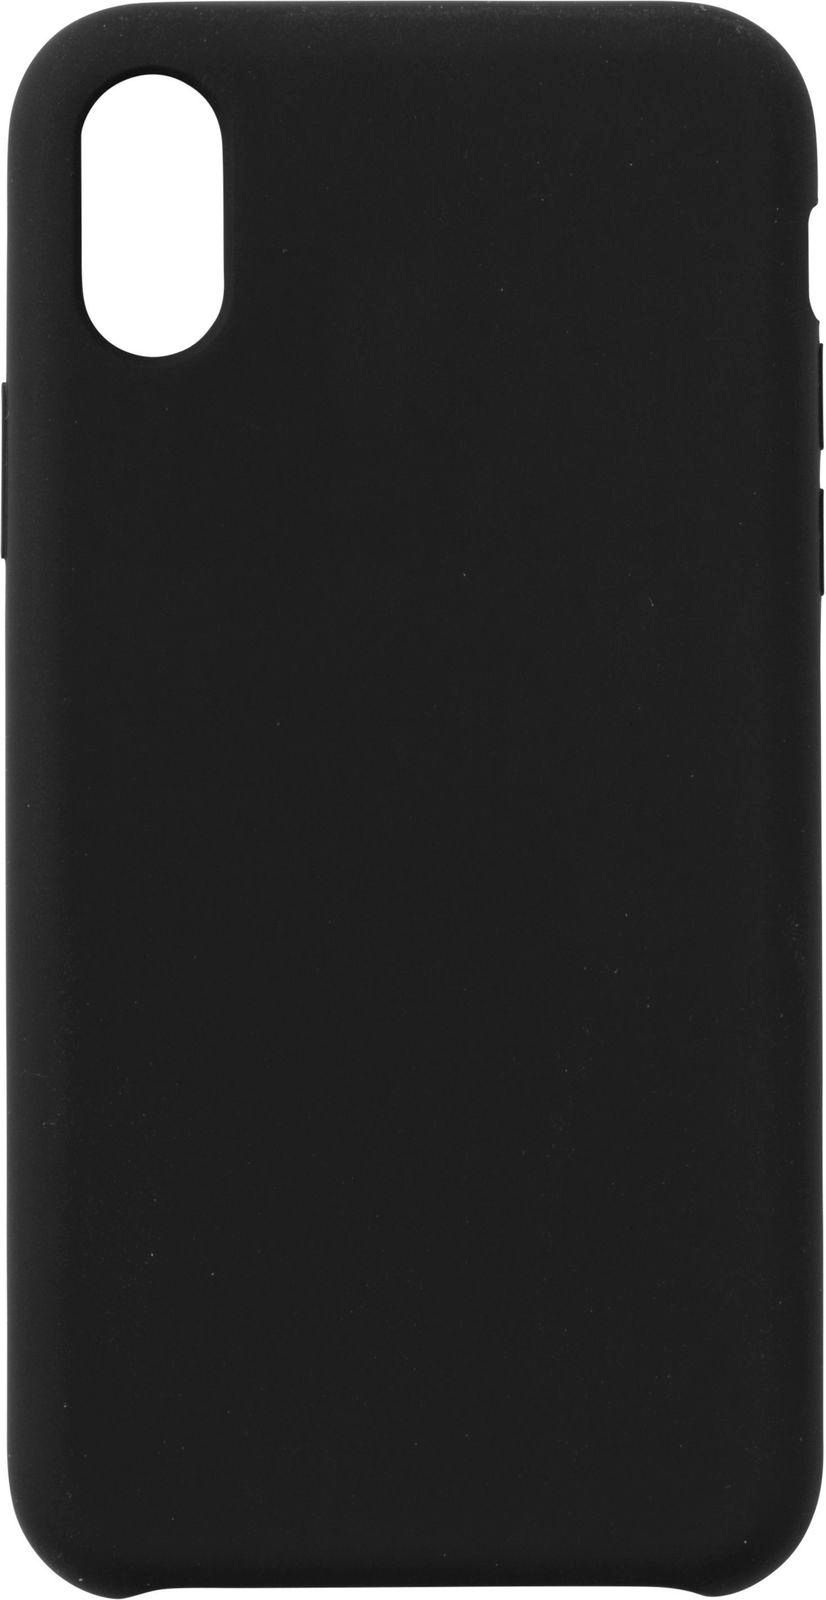 iPhone X/xs Silicone Case Black Silk Touch